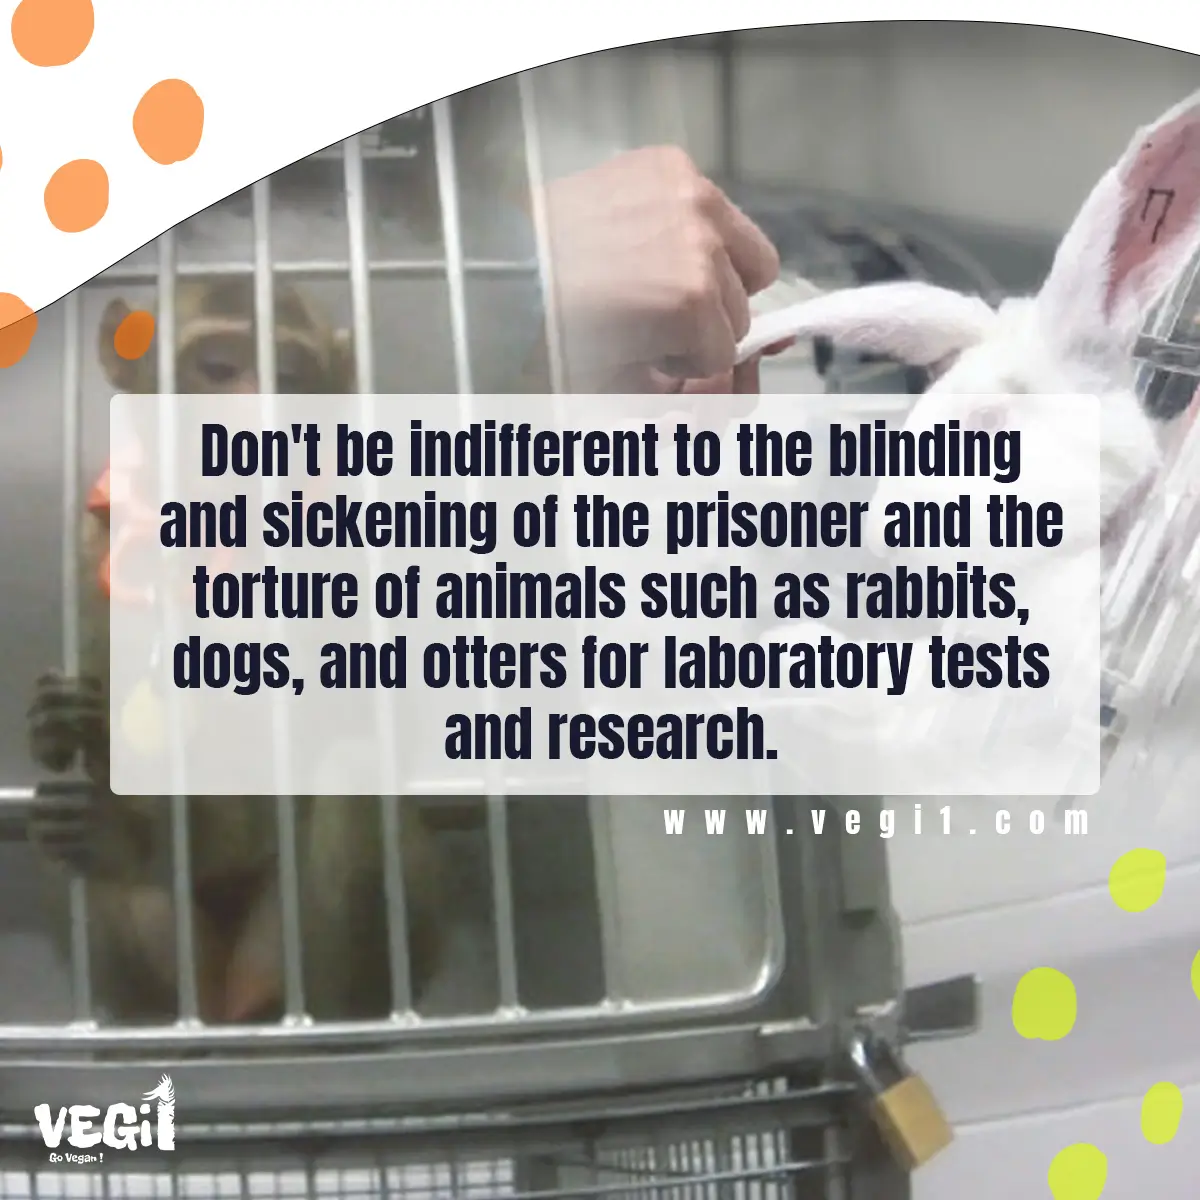 Don't be indifferent to the blinding and sickening of the prisoner and the torture of animals such as rabbits, dogs, and otters for laboratory tests and research.